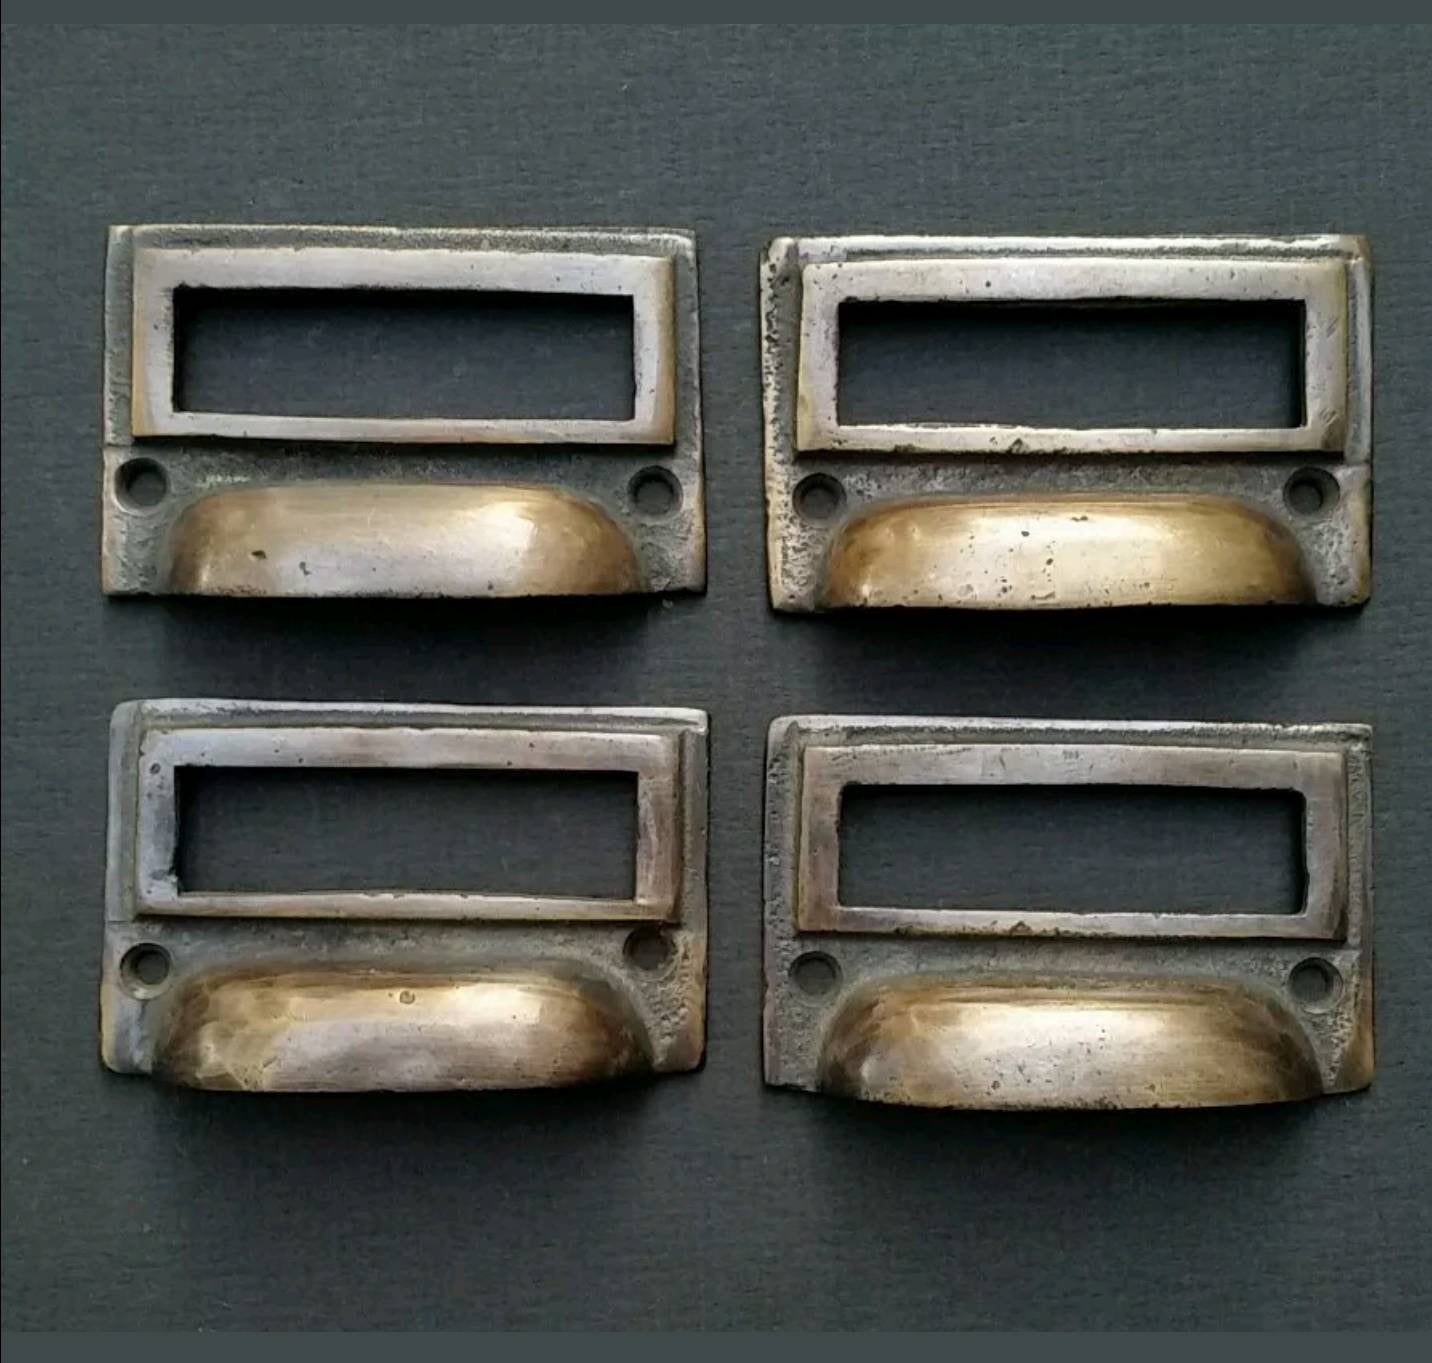 4 Antique style Card File Cabinet Handle, File Label Holders, Cup Bin Pull Handles, Organizing #F1